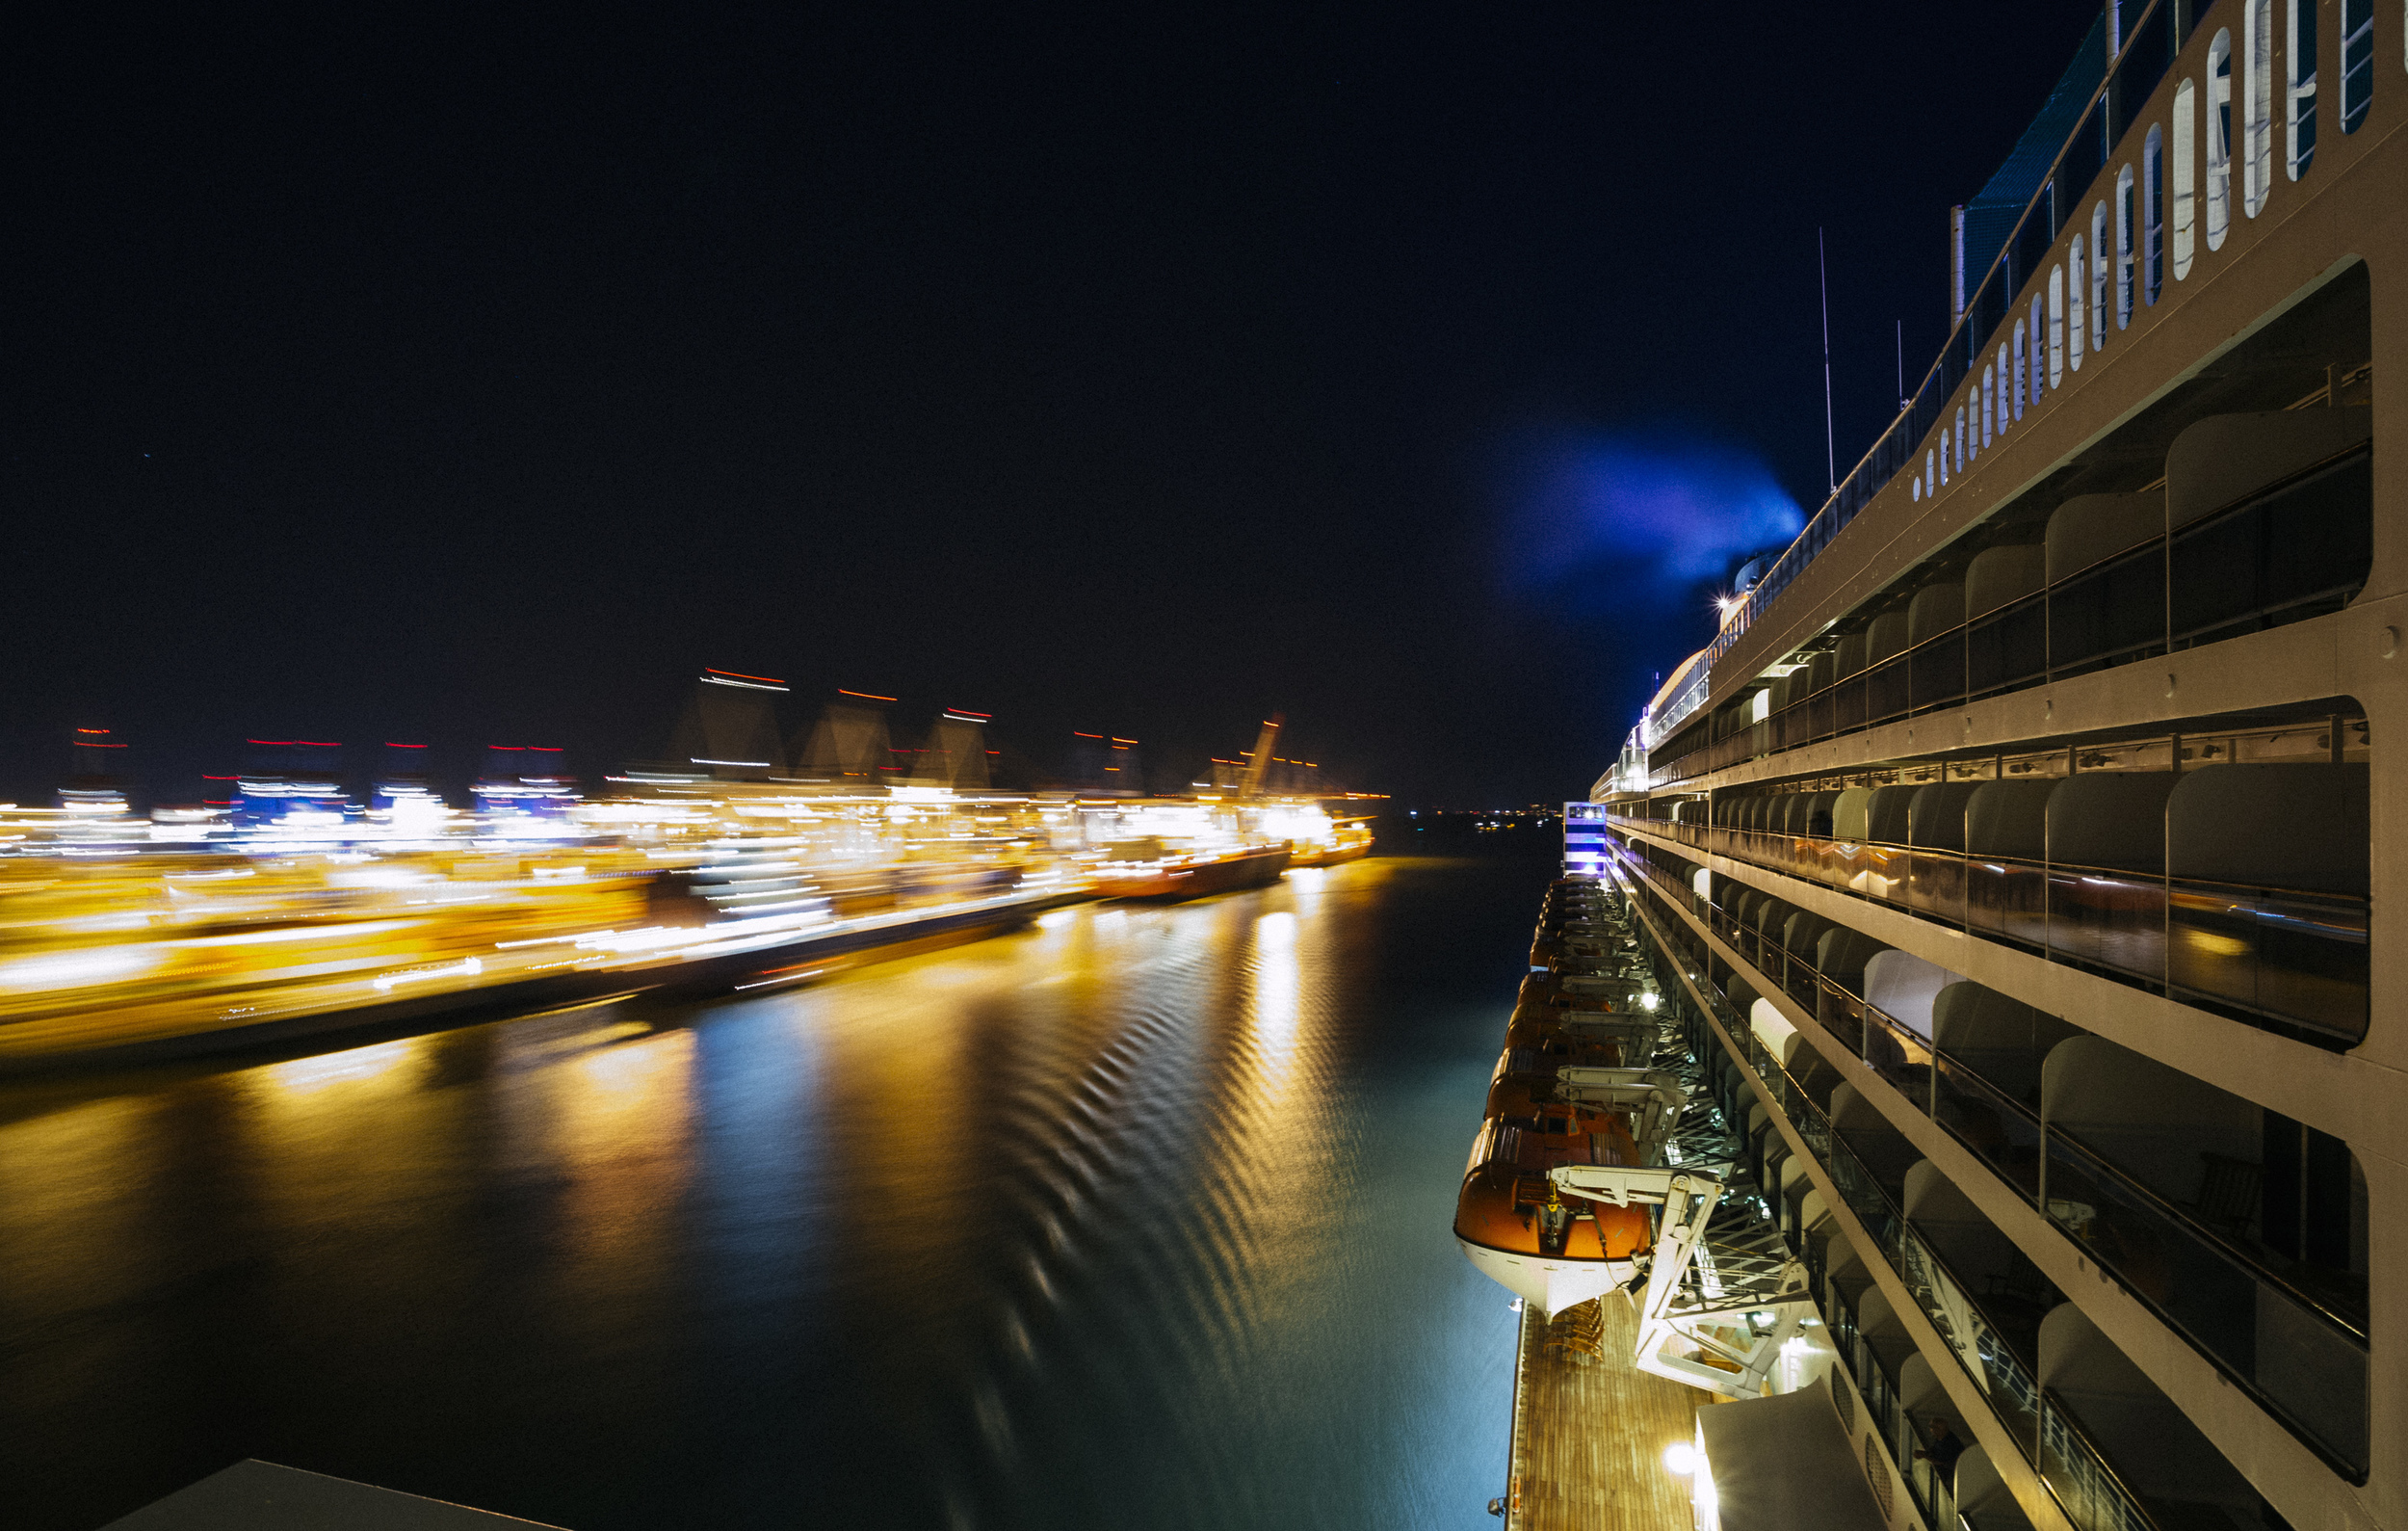   Queen Mary 2 reportage New York to Hamburg in 9 days for Annabelle, June 2015  